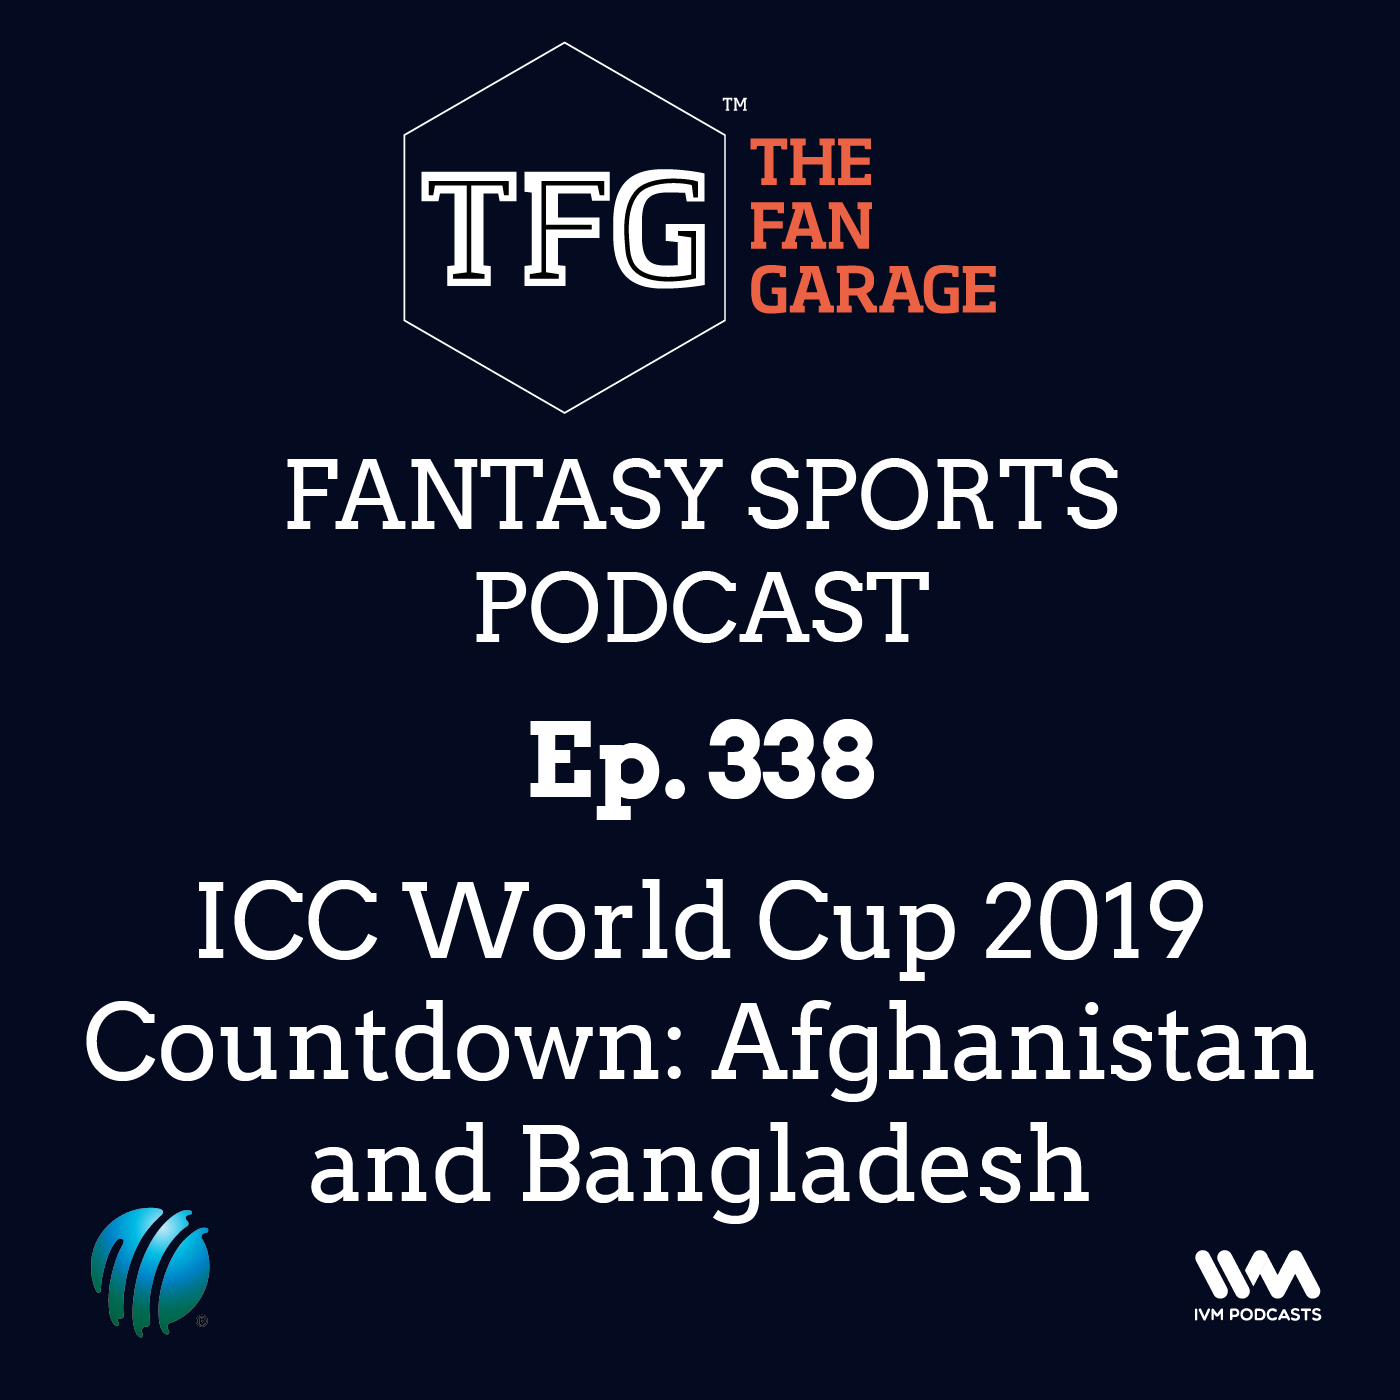 TFG Fantasy Sports Podcast Ep. 338: ICC World Cup 2019 Countdown: Afghanistan and Bangladesh